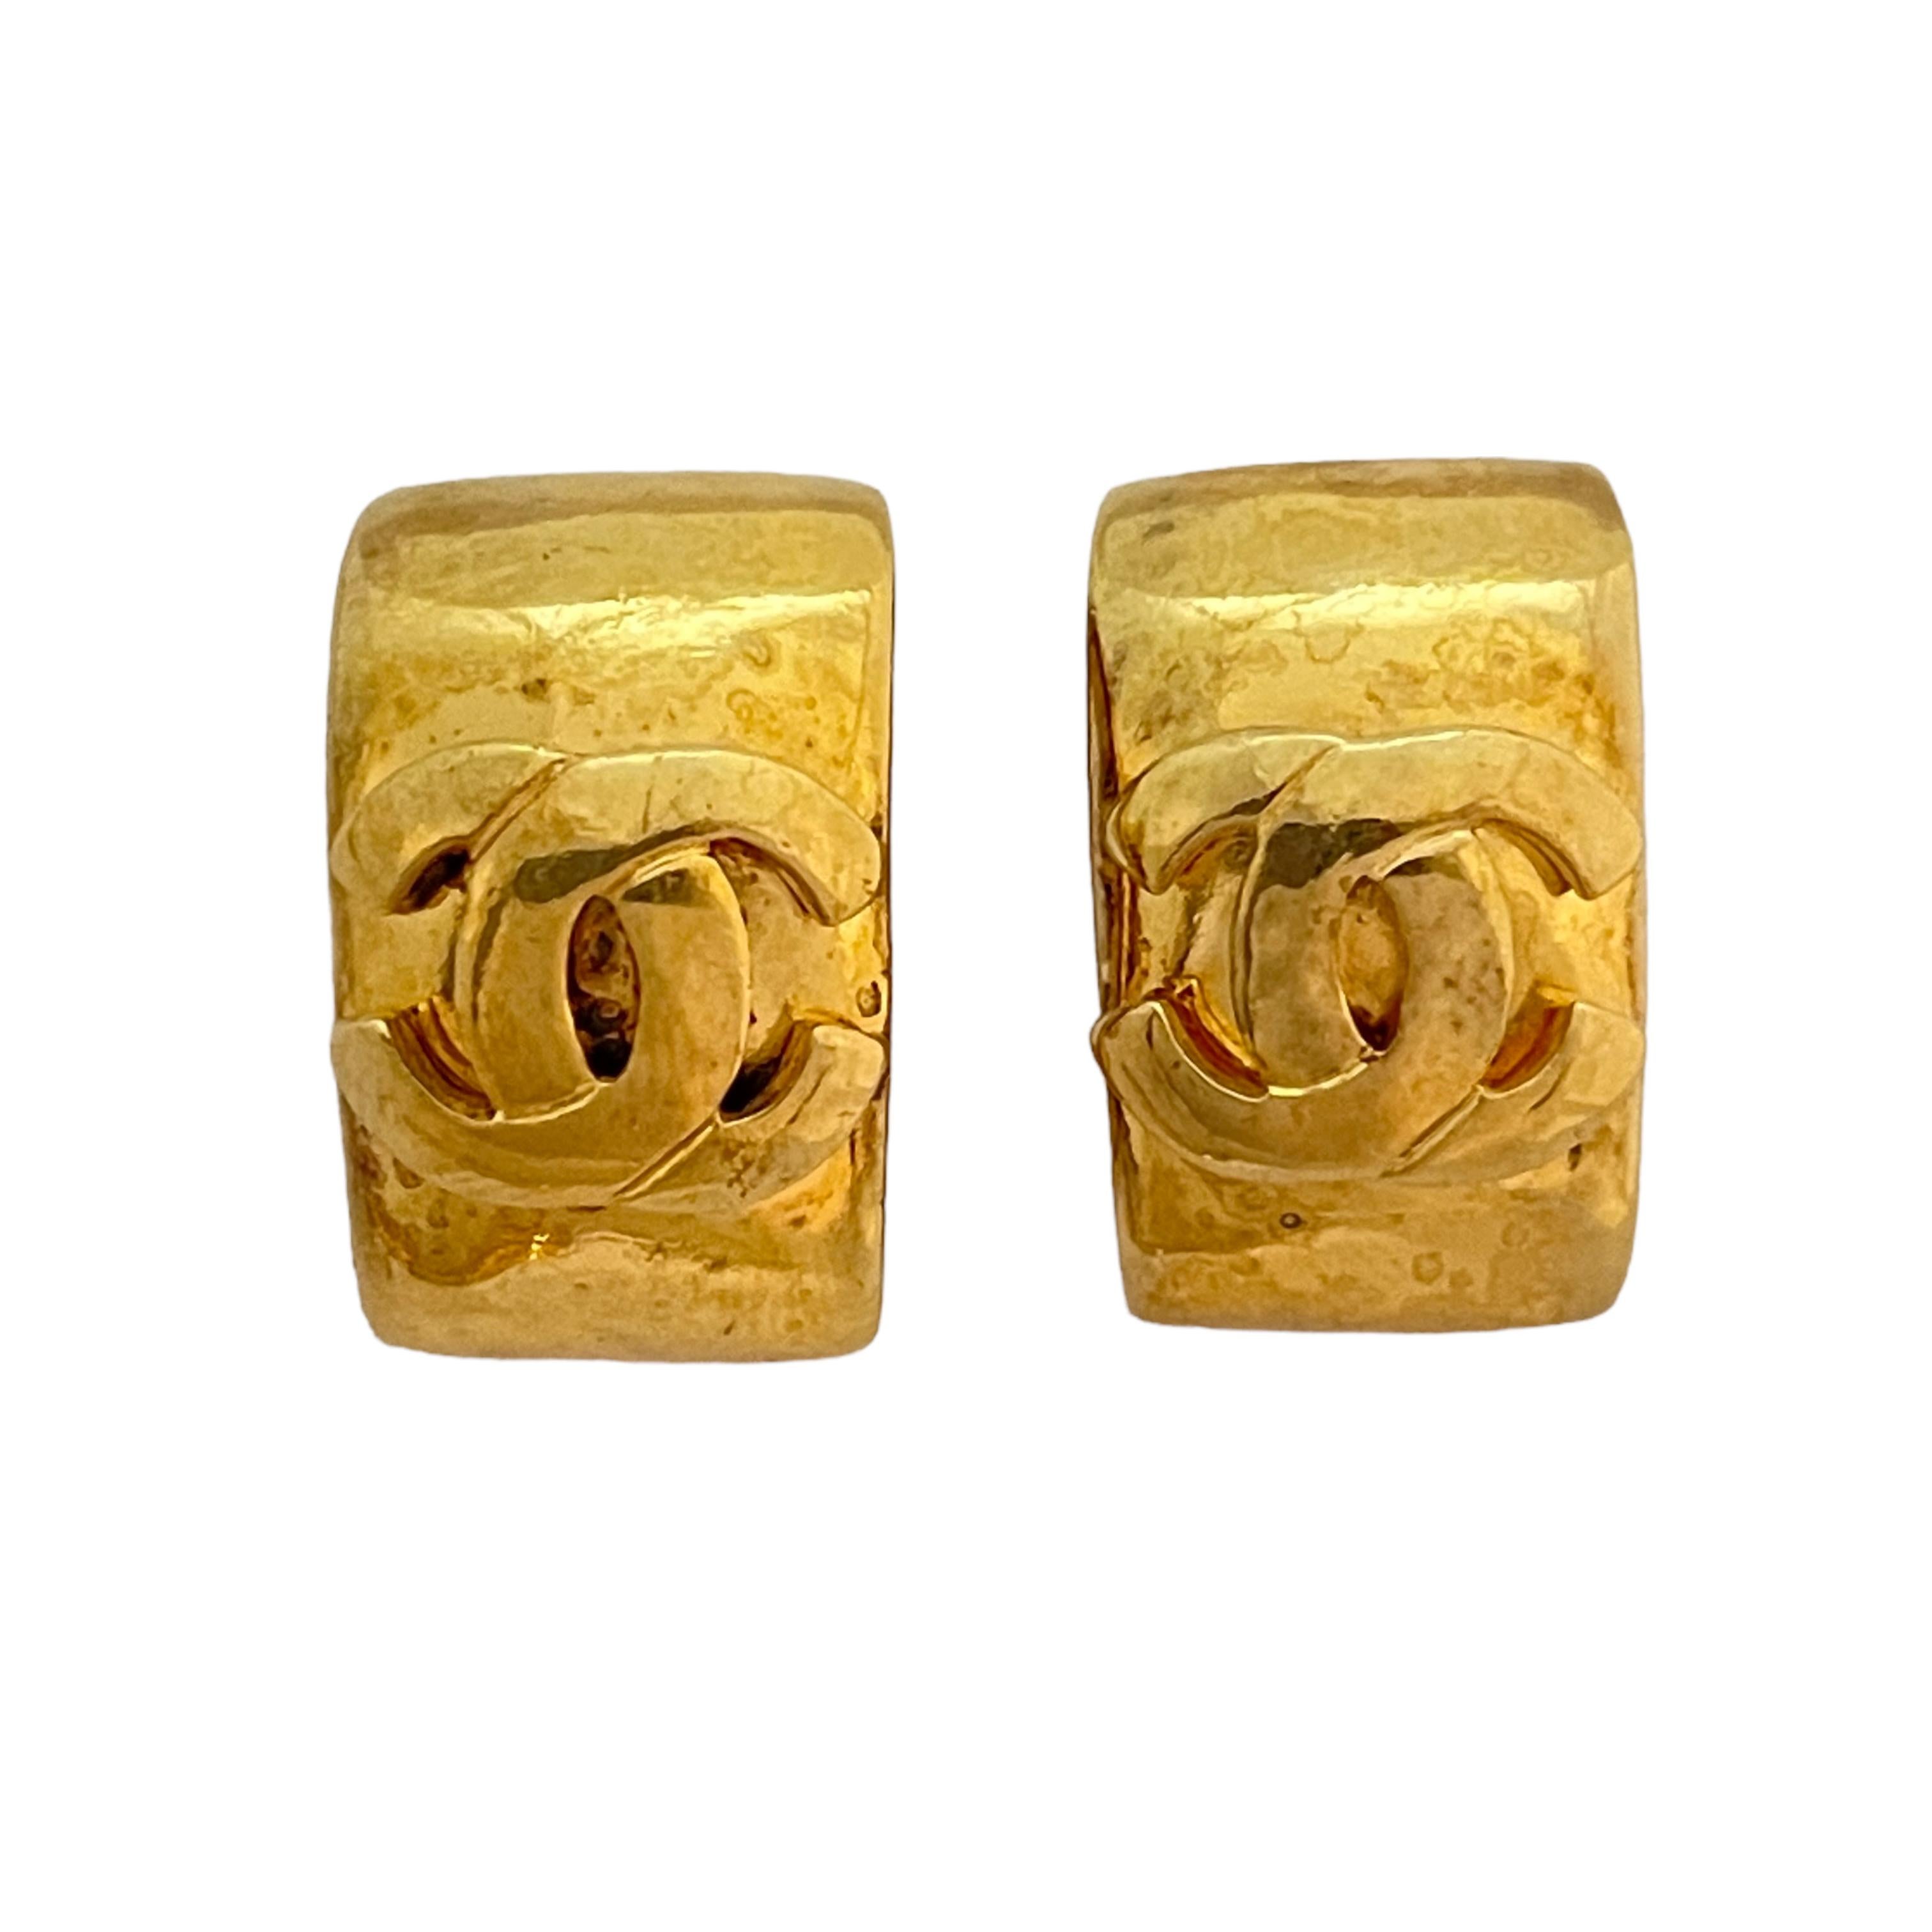 Vtg CHANEL CC logo Made in France gold door knocker clip on earrings In Good Condition For Sale In Palos Hills, IL